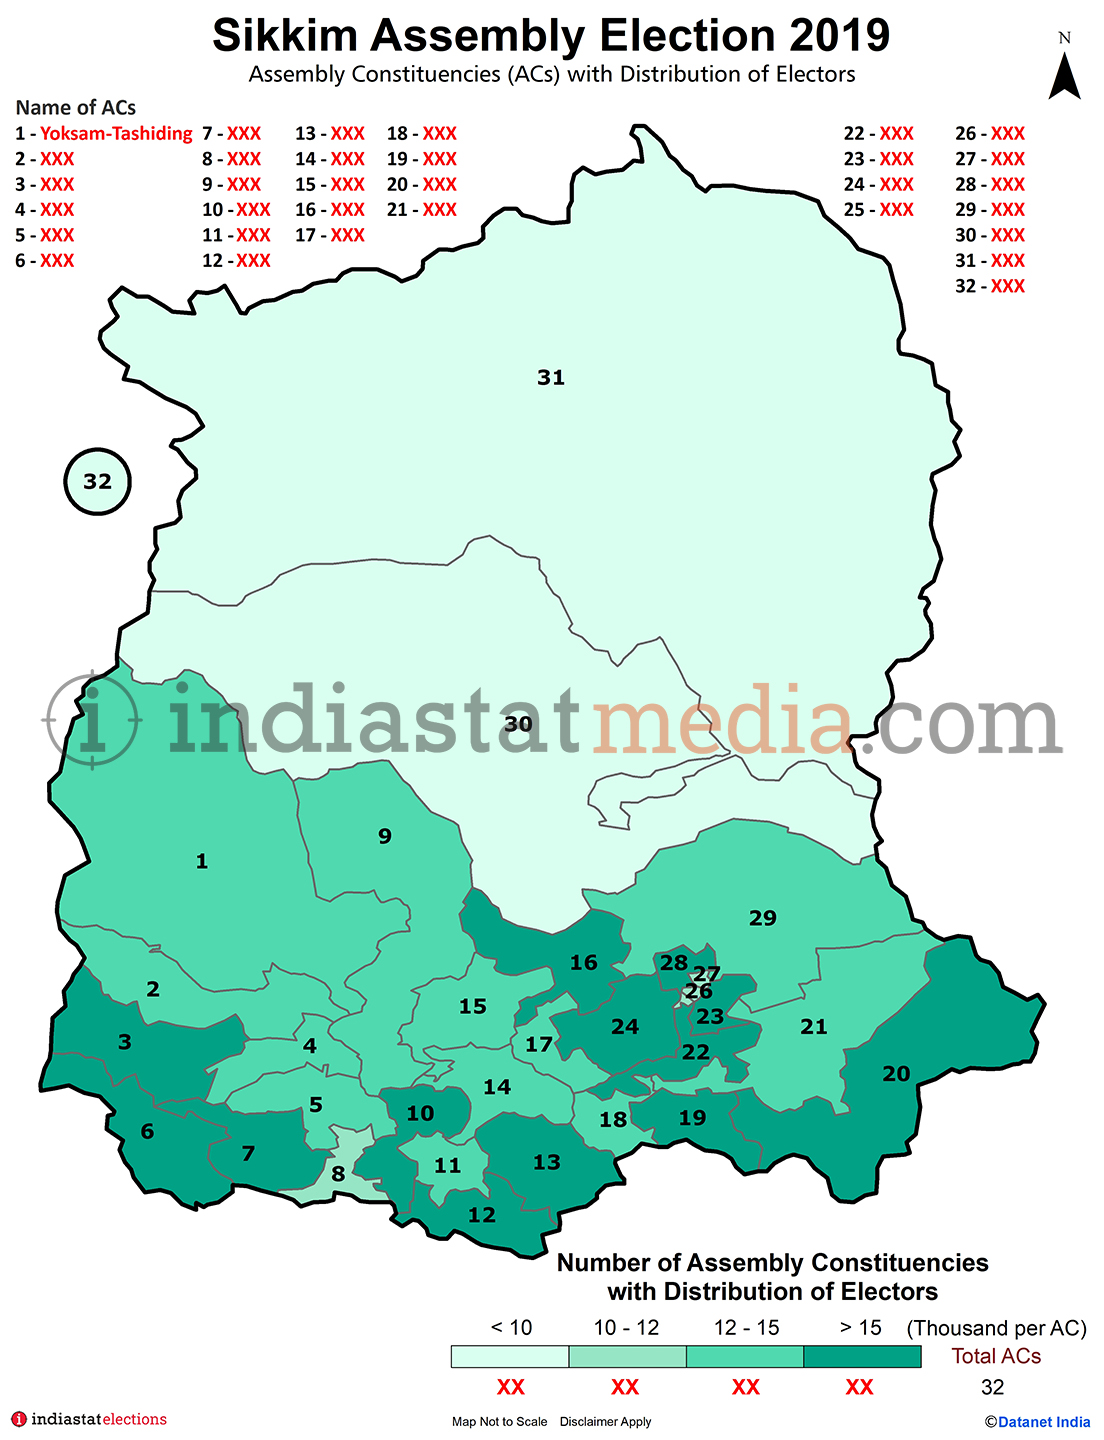 Assembly Constituencies (ACs) with Distribution of Electors in Sikkim (Assembly Election - 2019)